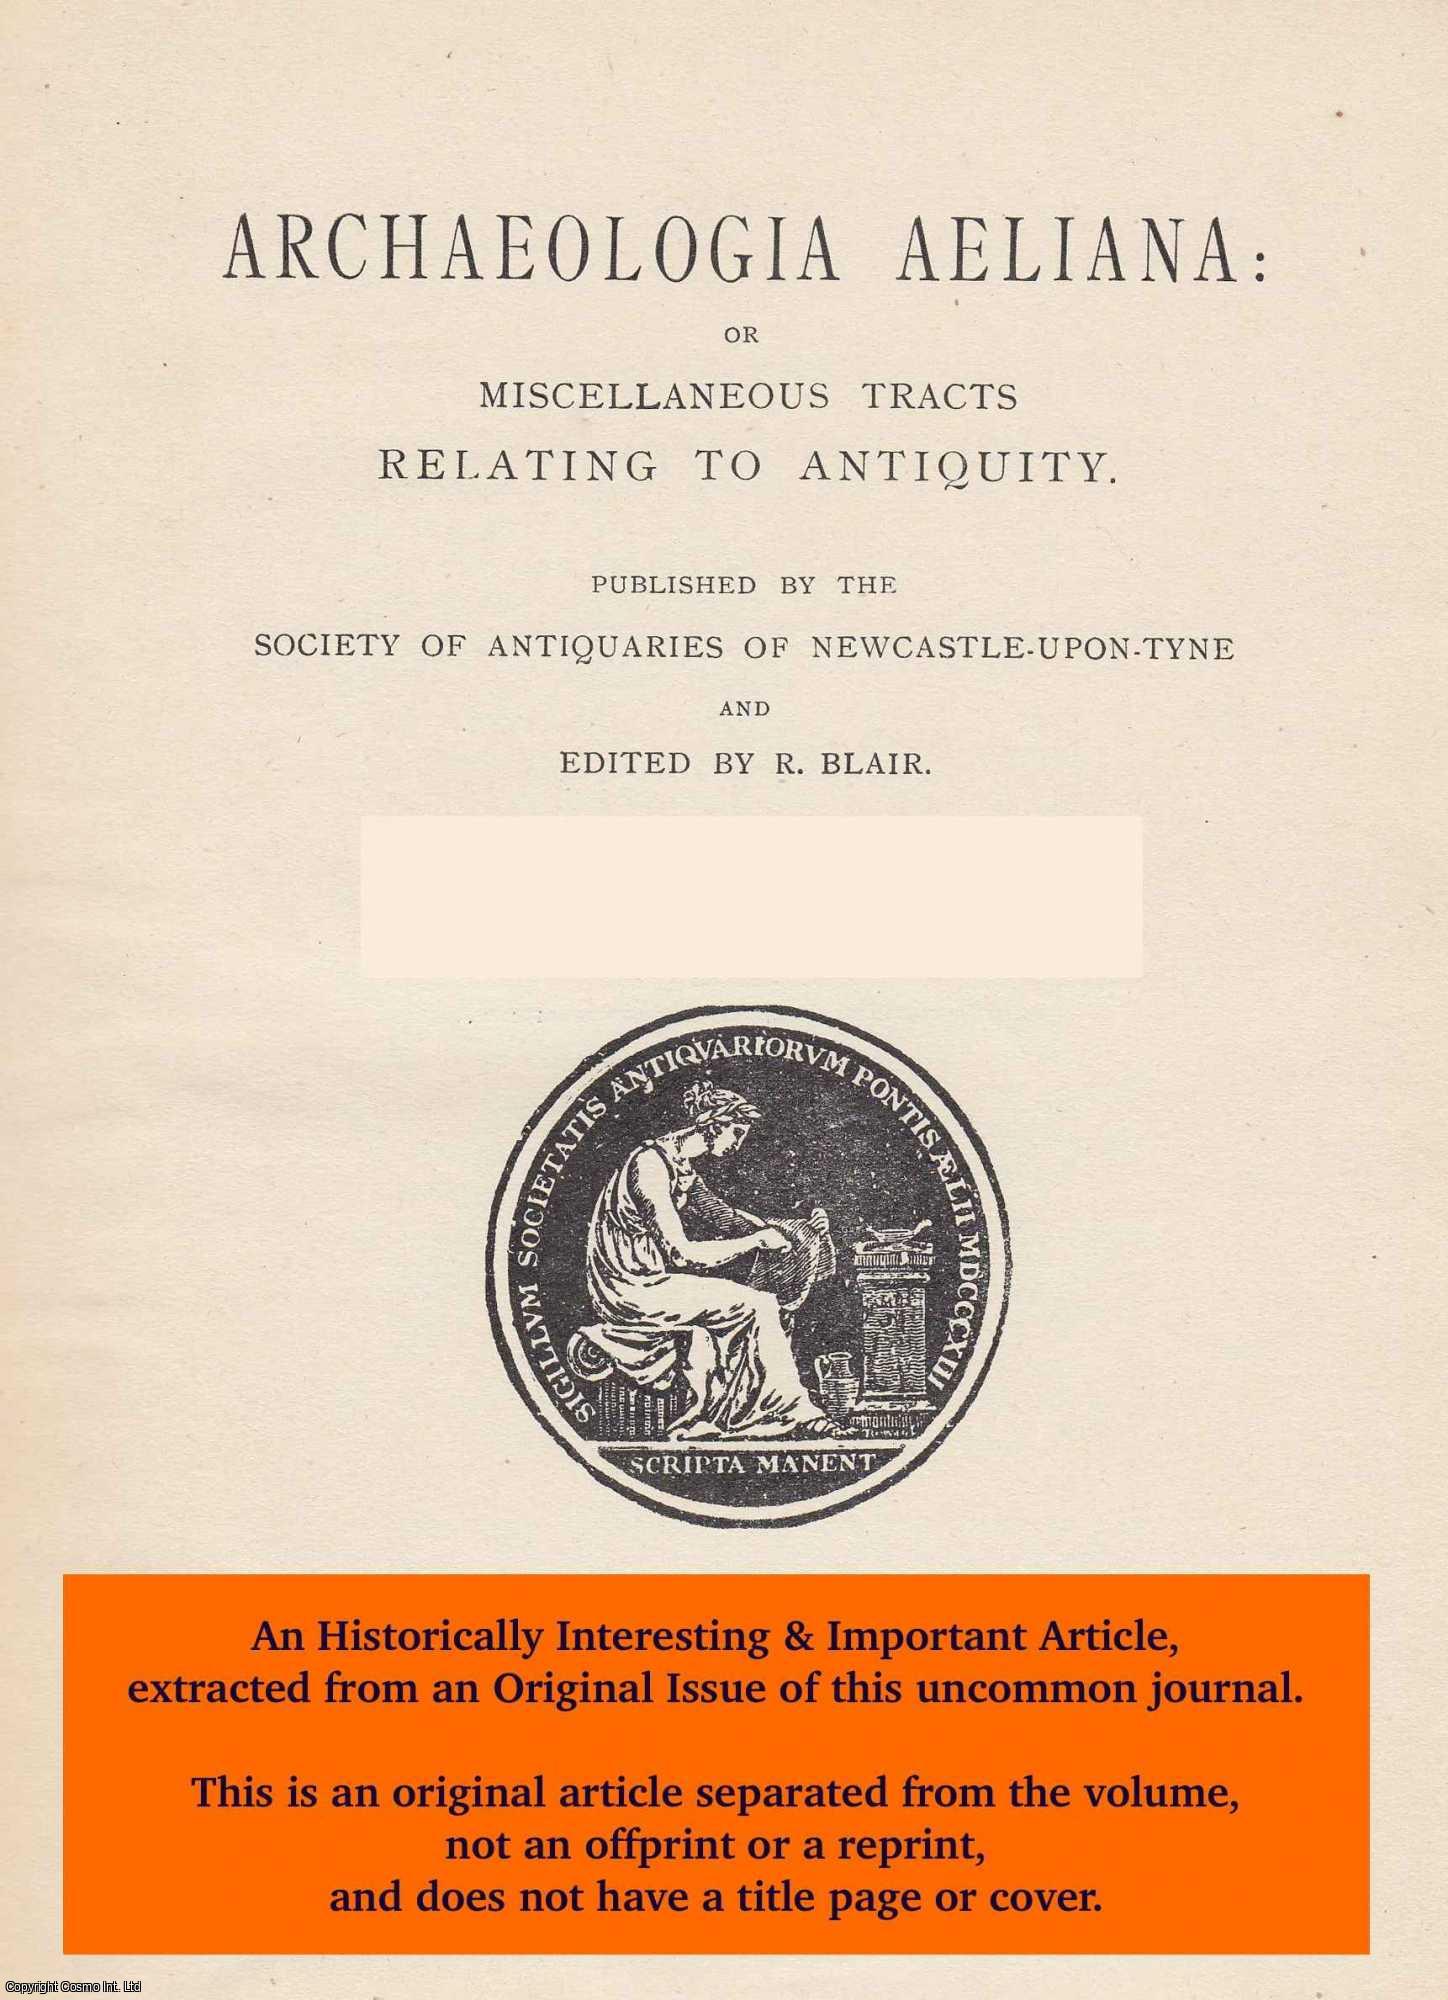 A. J. Lilburn - 1958. The Pipe Rolls of Edward I. Continued. An original article from The Archaeologia Aeliana: or Miscellaneous Tracts Relating to Antiquity, 1958.